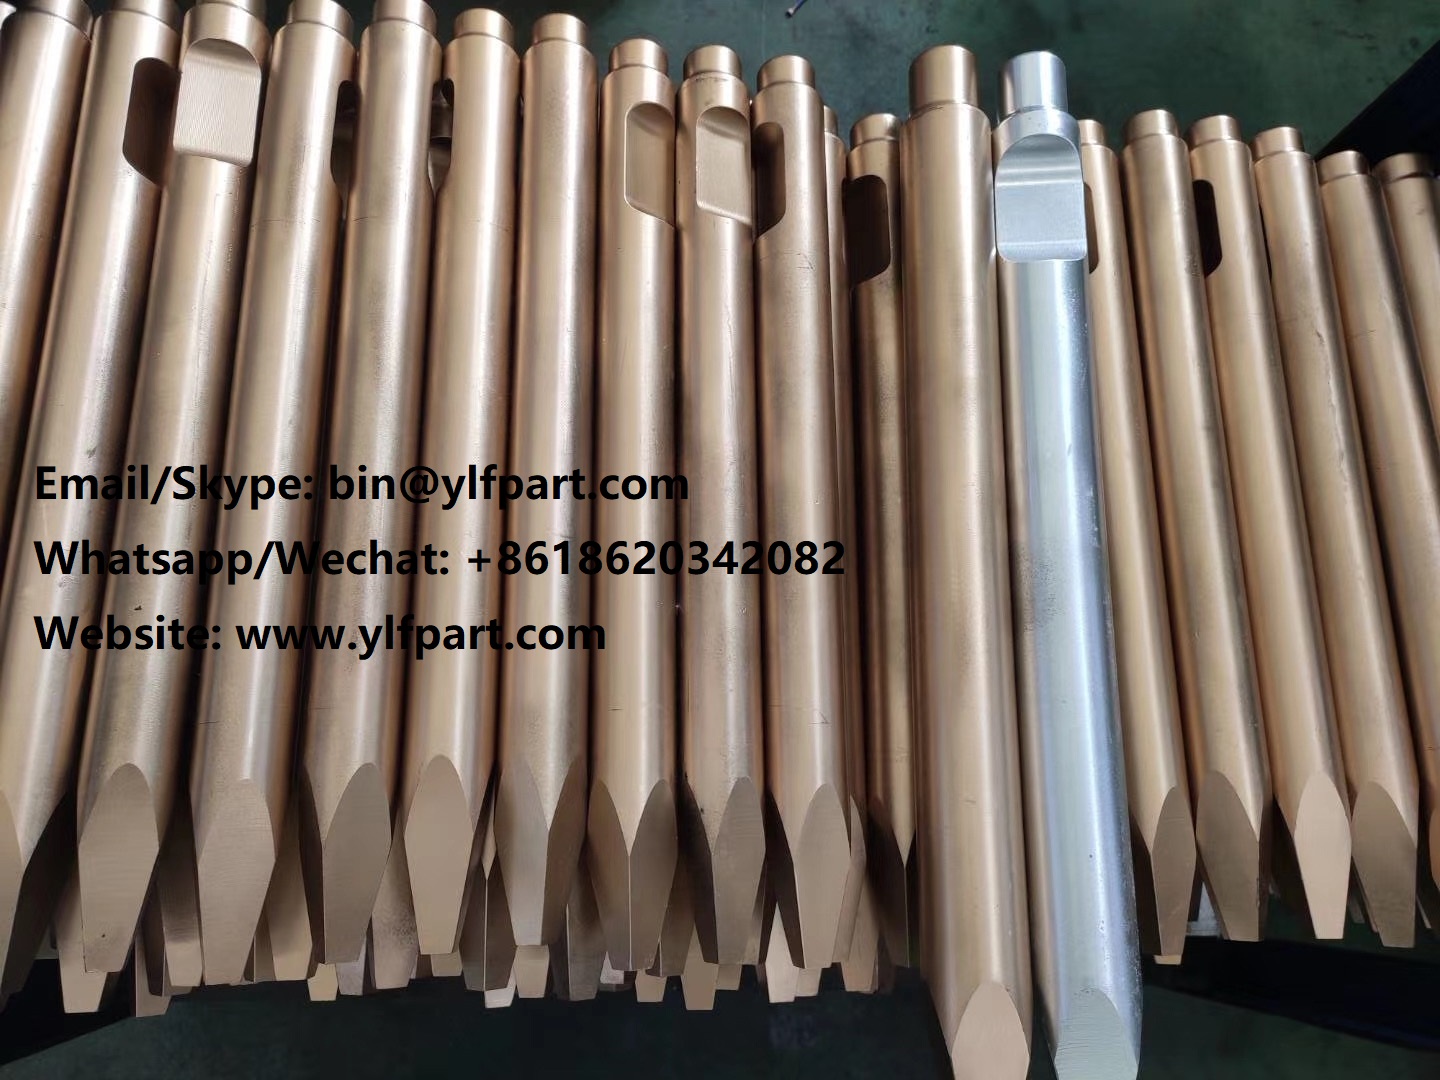 Cp400h cp550 cp600h cp700h cp750 cp100 cp200 Chicago pneumatic hydraulic breaker hammer part moil chisel tool